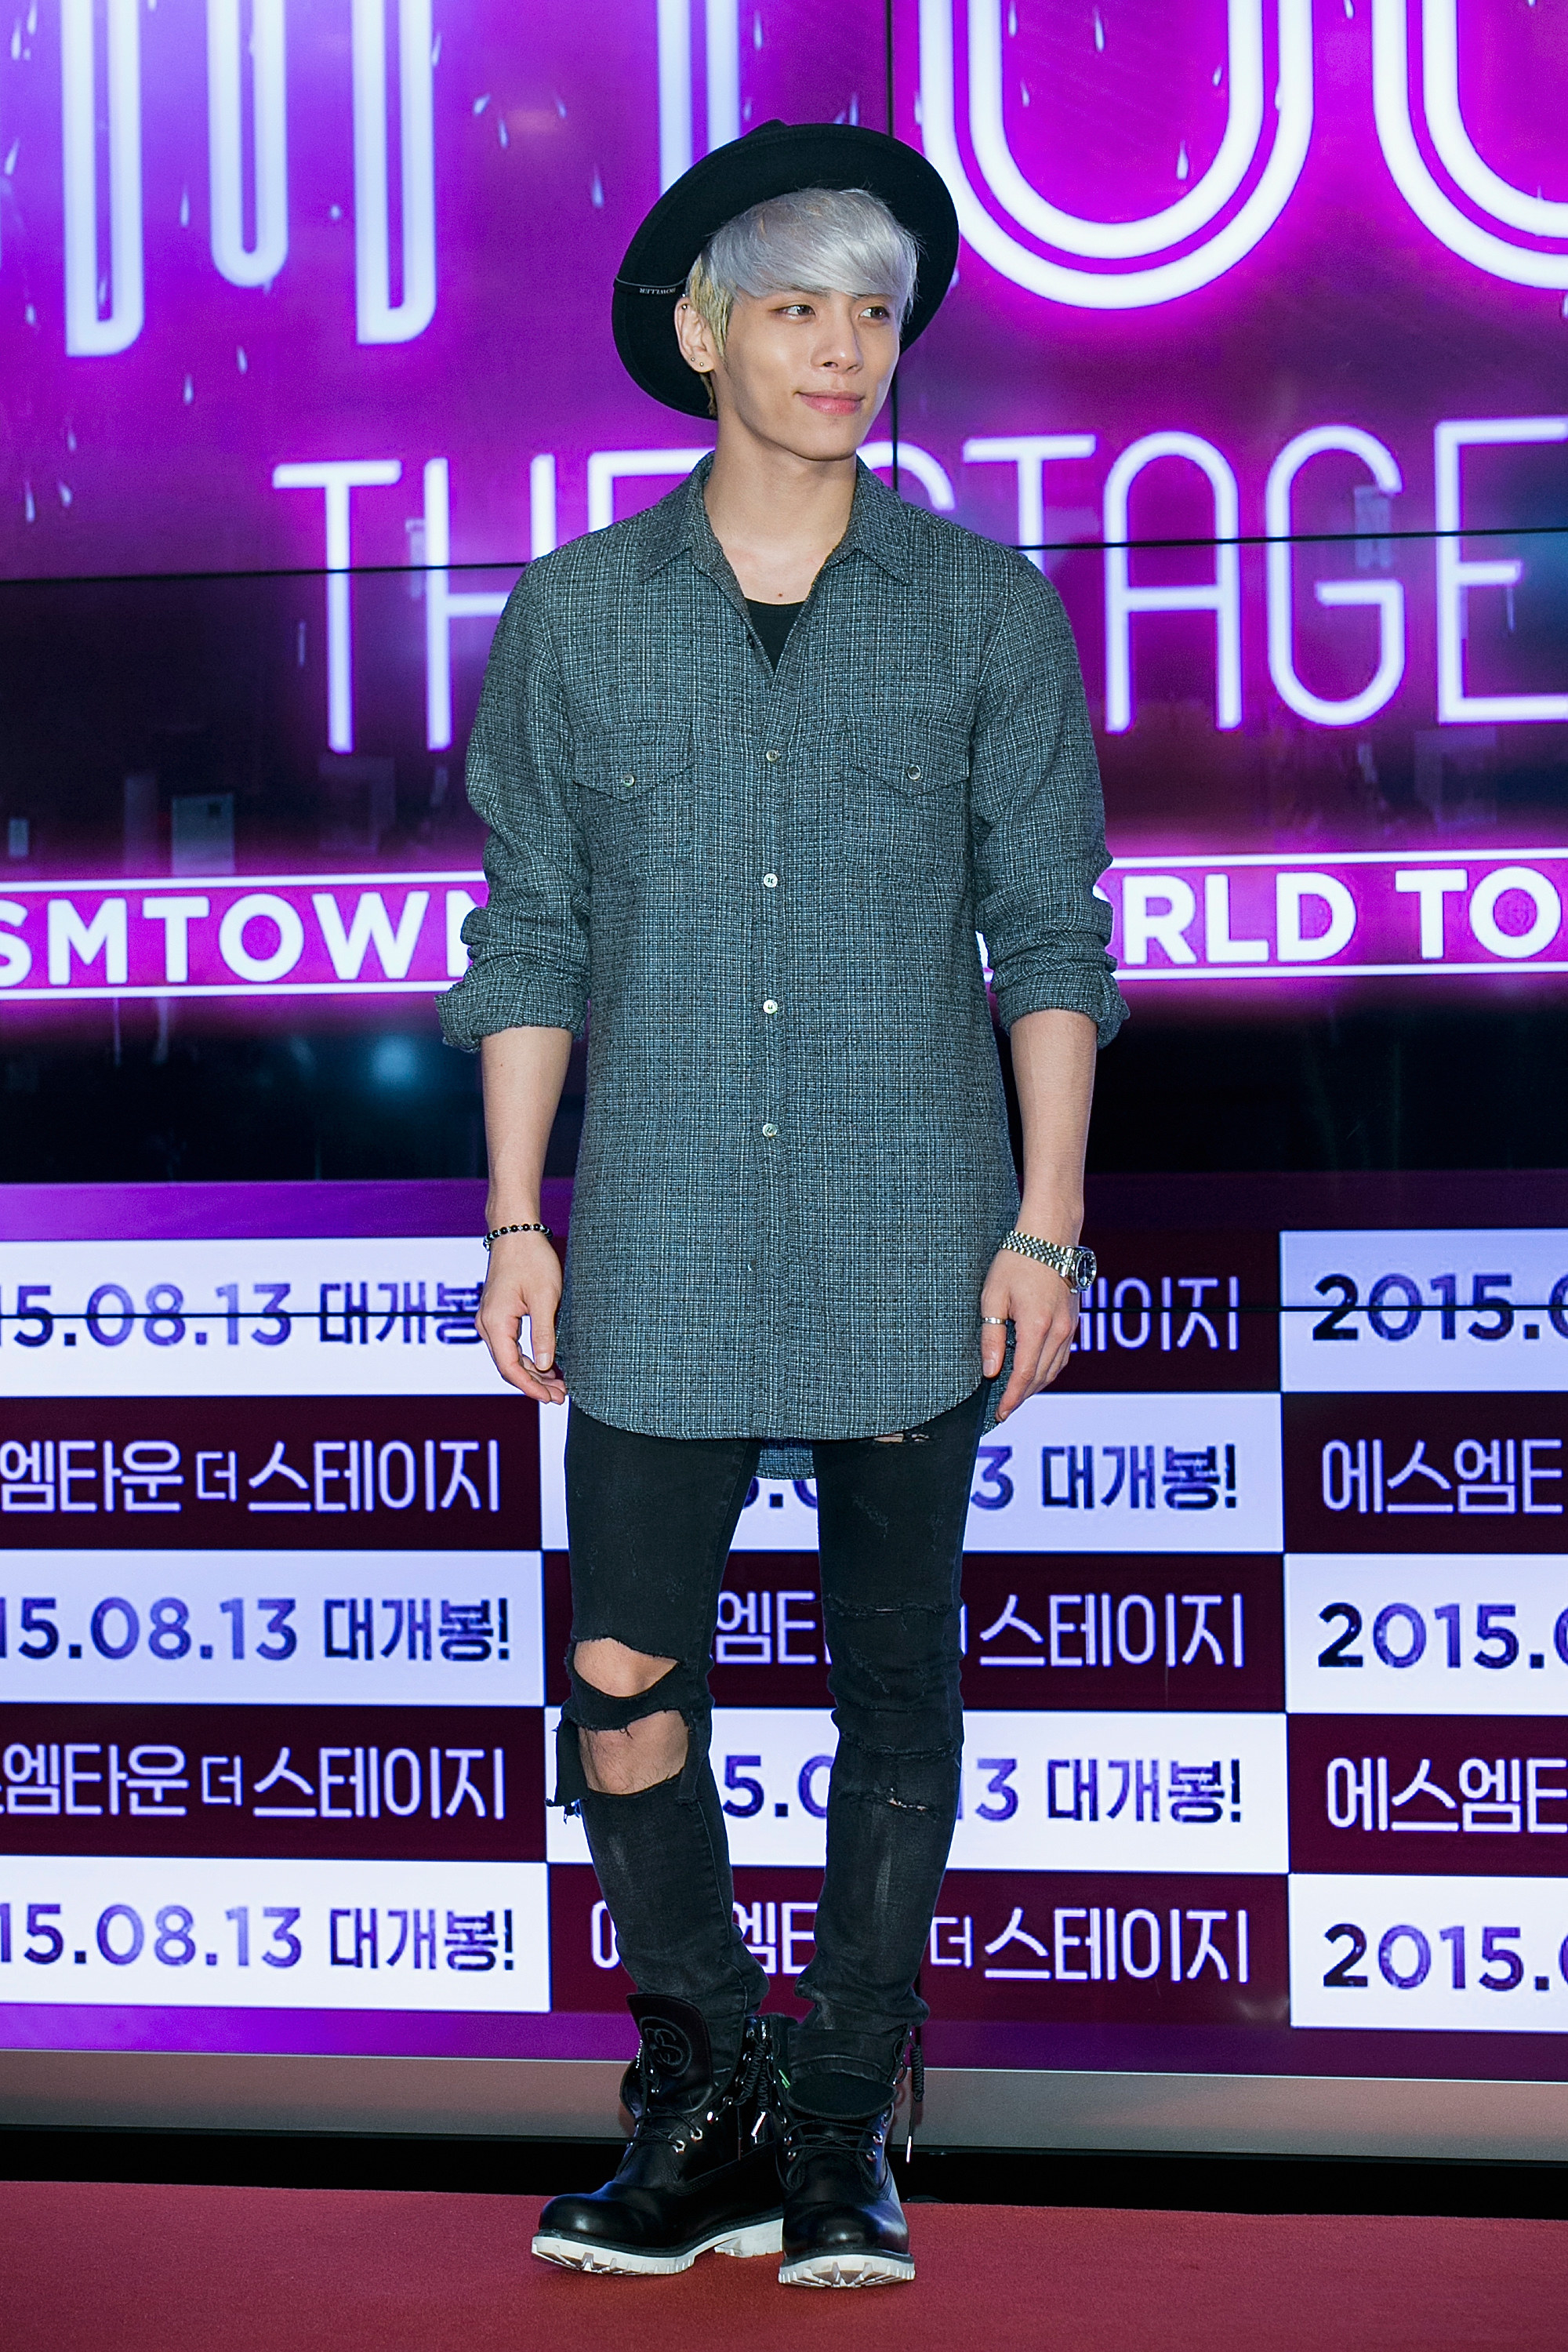 Jong-hyun Kim is casually dressed and has a closed-mouth style in front of a lit-up screen.